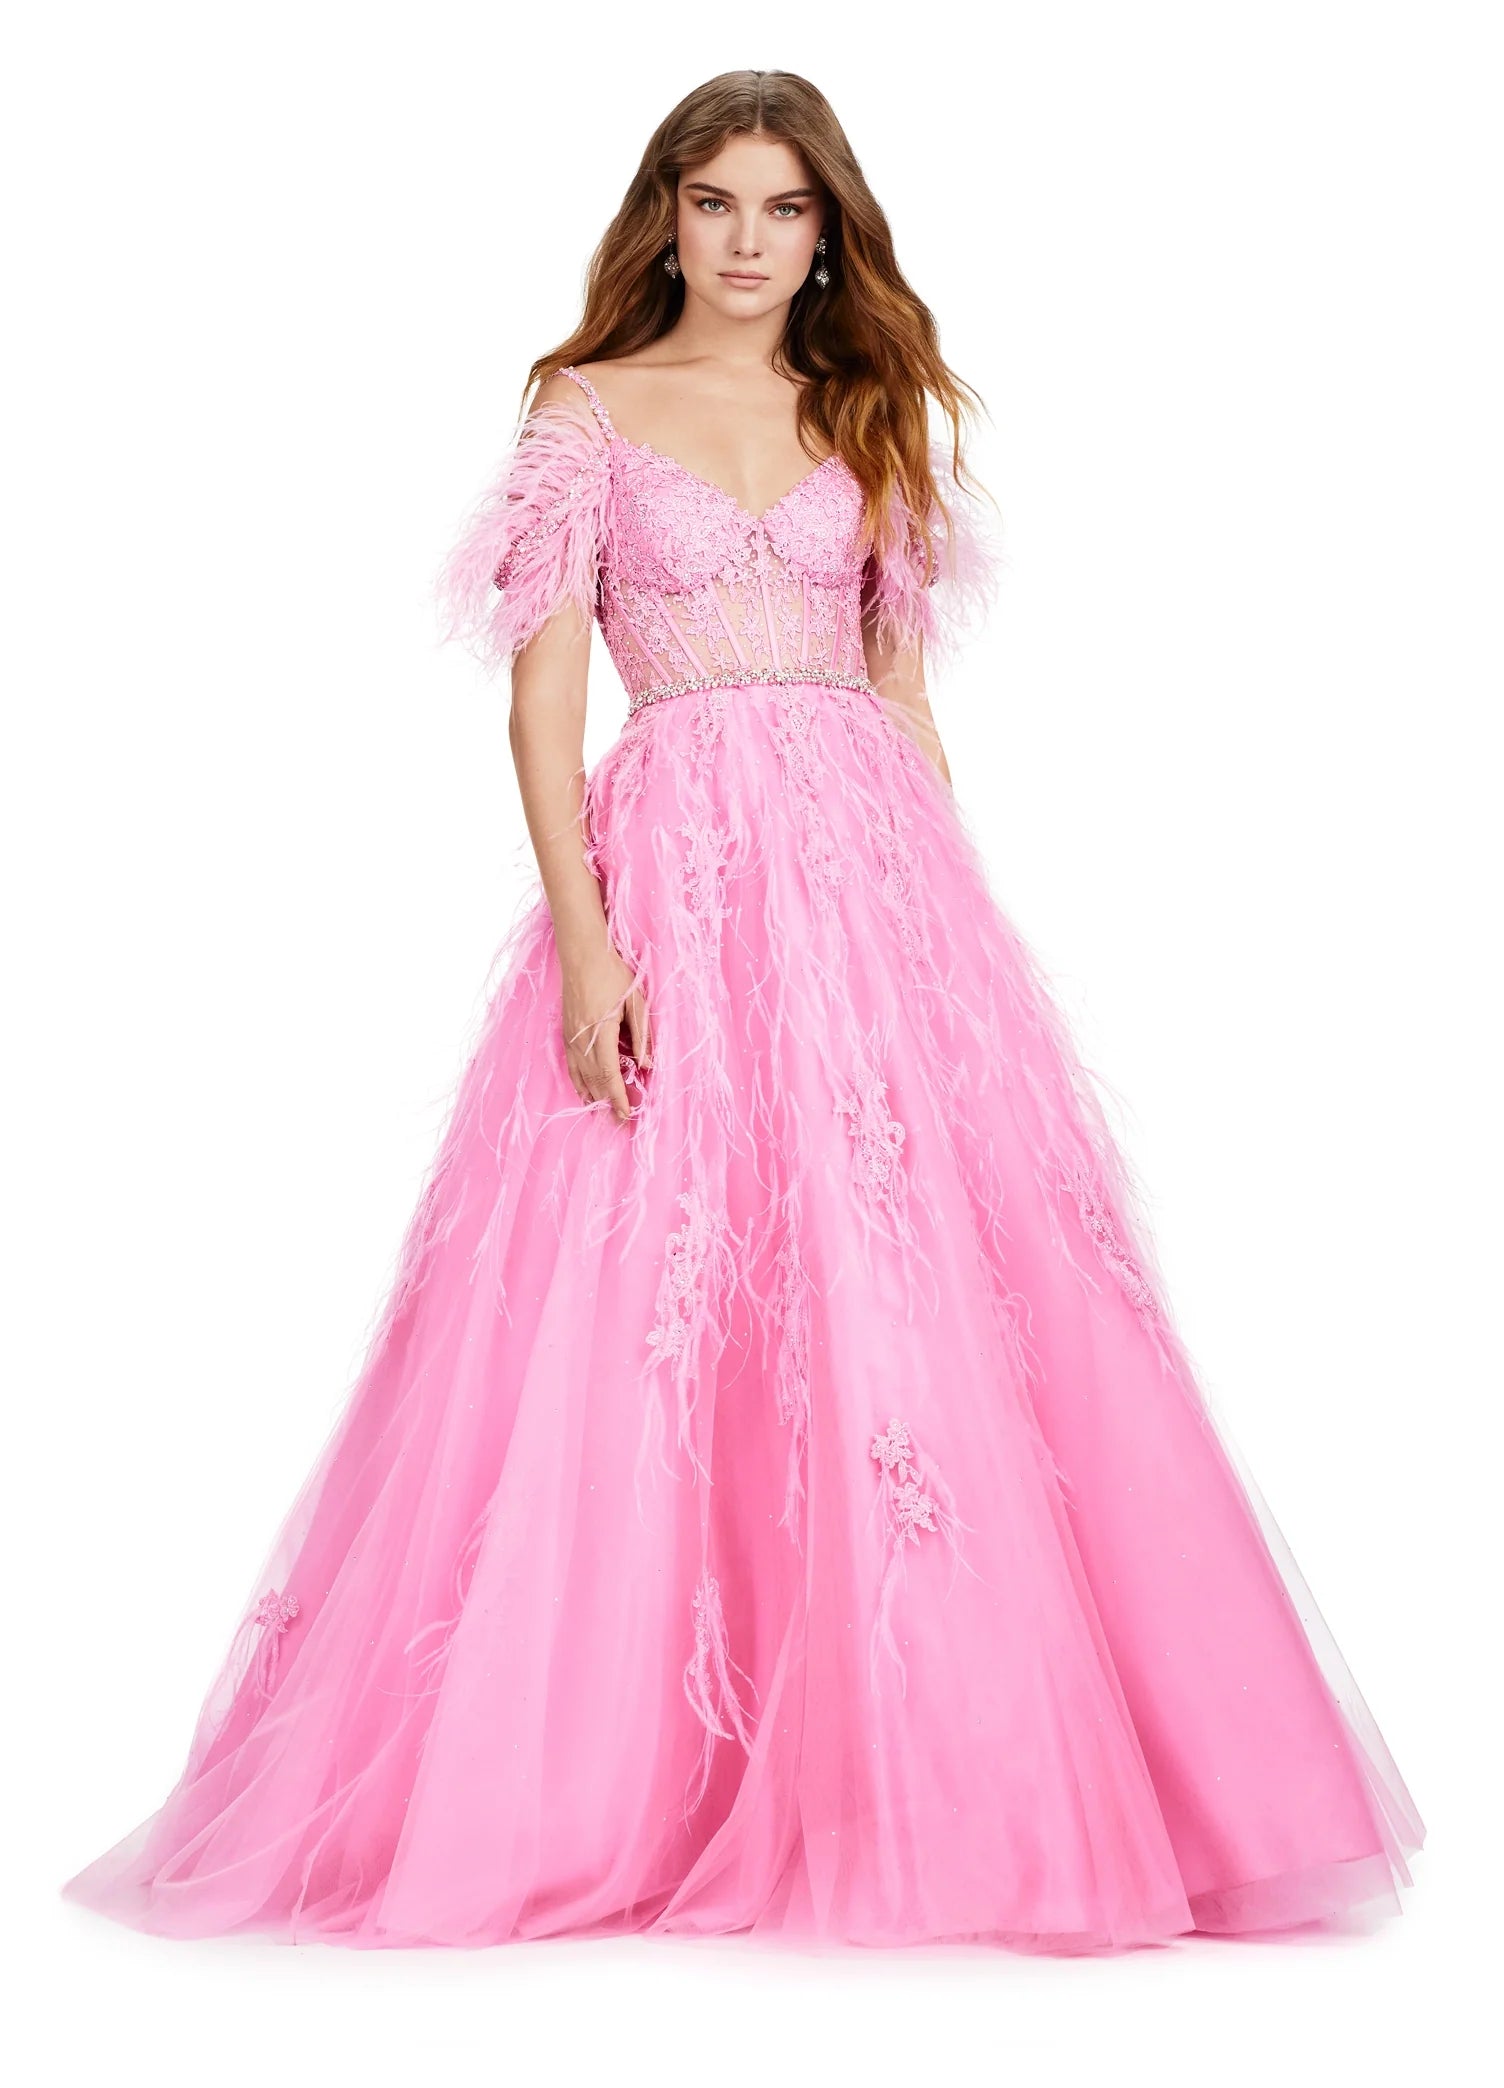 The Ashley Lauren 11447 Long off the shoulder Feather Ball Gown Prom Dress with Lace Corset is a stunning formal wear choice. This elegant design features a long A-line skirt with an inset lace bodice with off-the-shoulder straps and a full feather skirt. The corset waistline flatters your figure and creates an hourglass silhouette. Make a statement wearing this timeless design. Crystal embellished straps and wait band.

Sizes: 00-18

Colors: Pink, Orchid, Sky